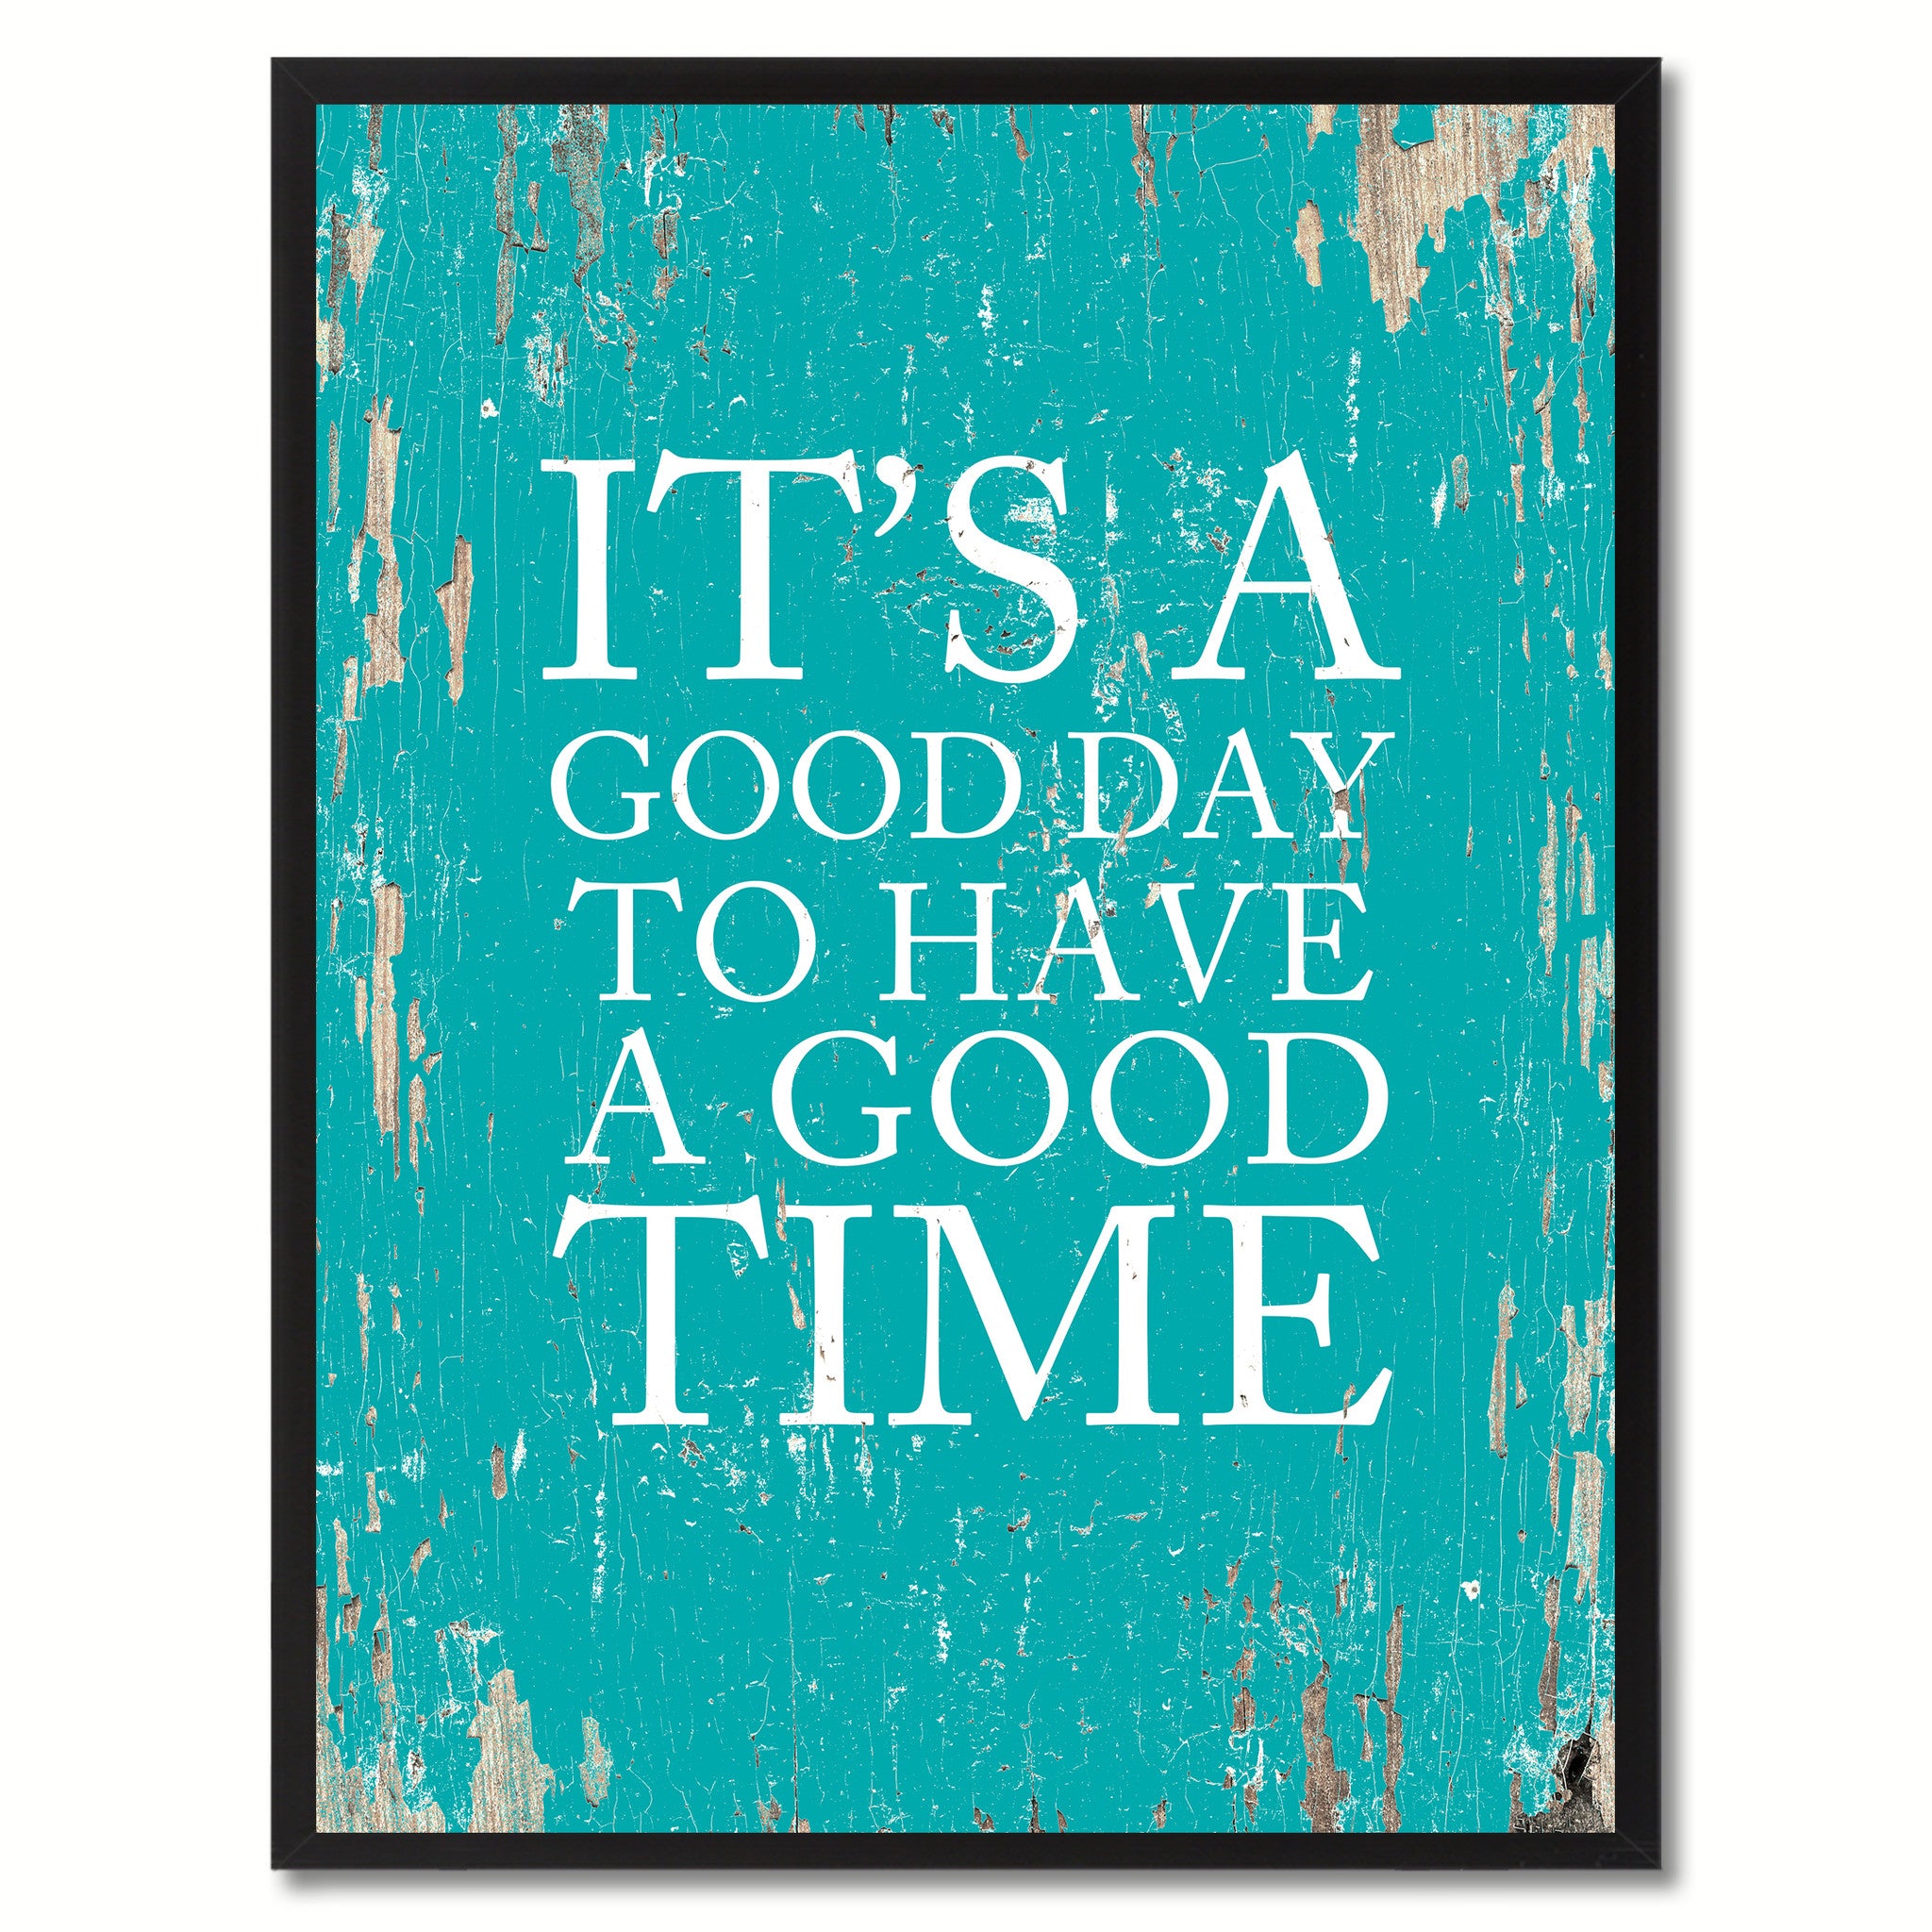 It's A Good Day To Have A Good Time Saying Canvas Print, Black Picture Frame Home Decor Wall Art Gifts